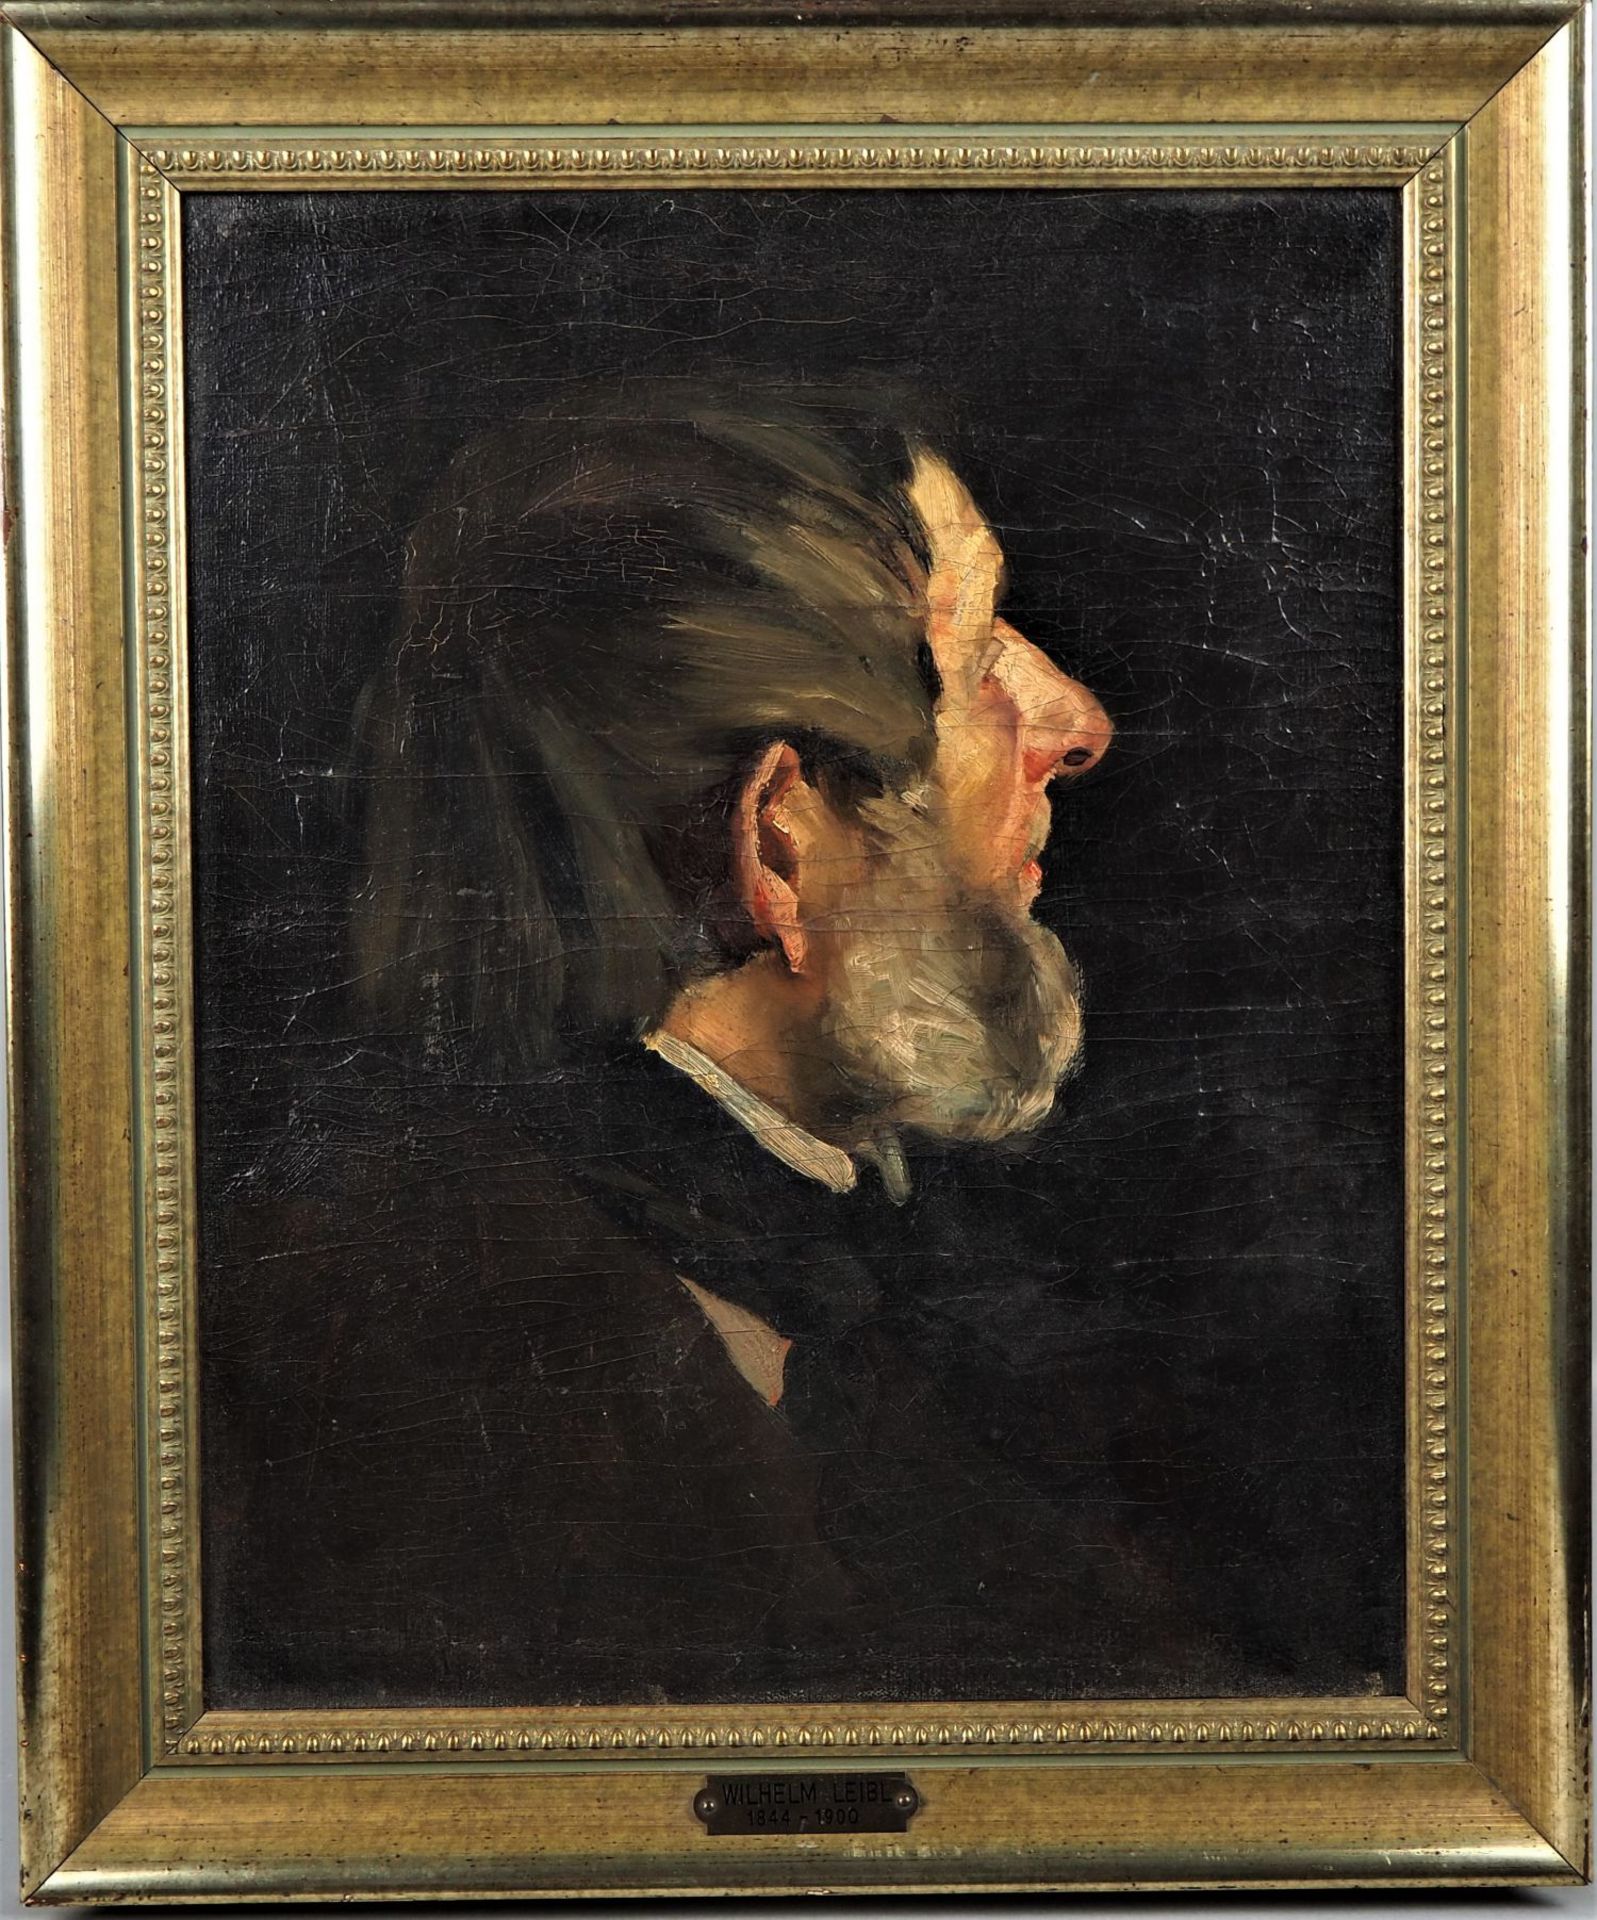 Wilhelm Leibl (1844-1900), Lost profile, 2nd half of the 19th century.